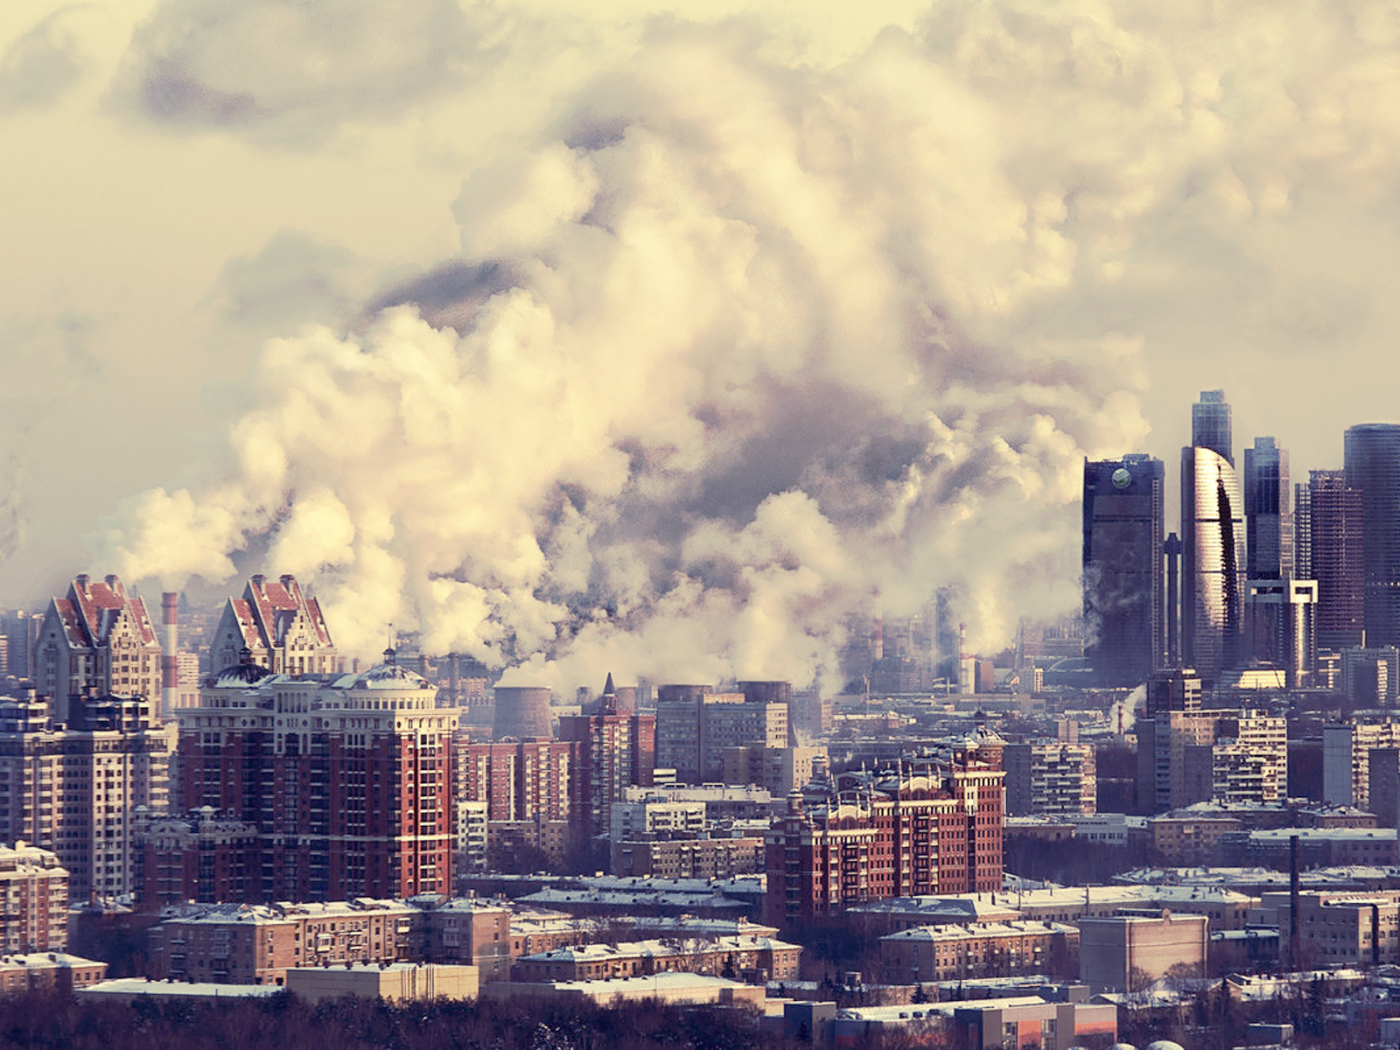 The Moscow under the white smoke